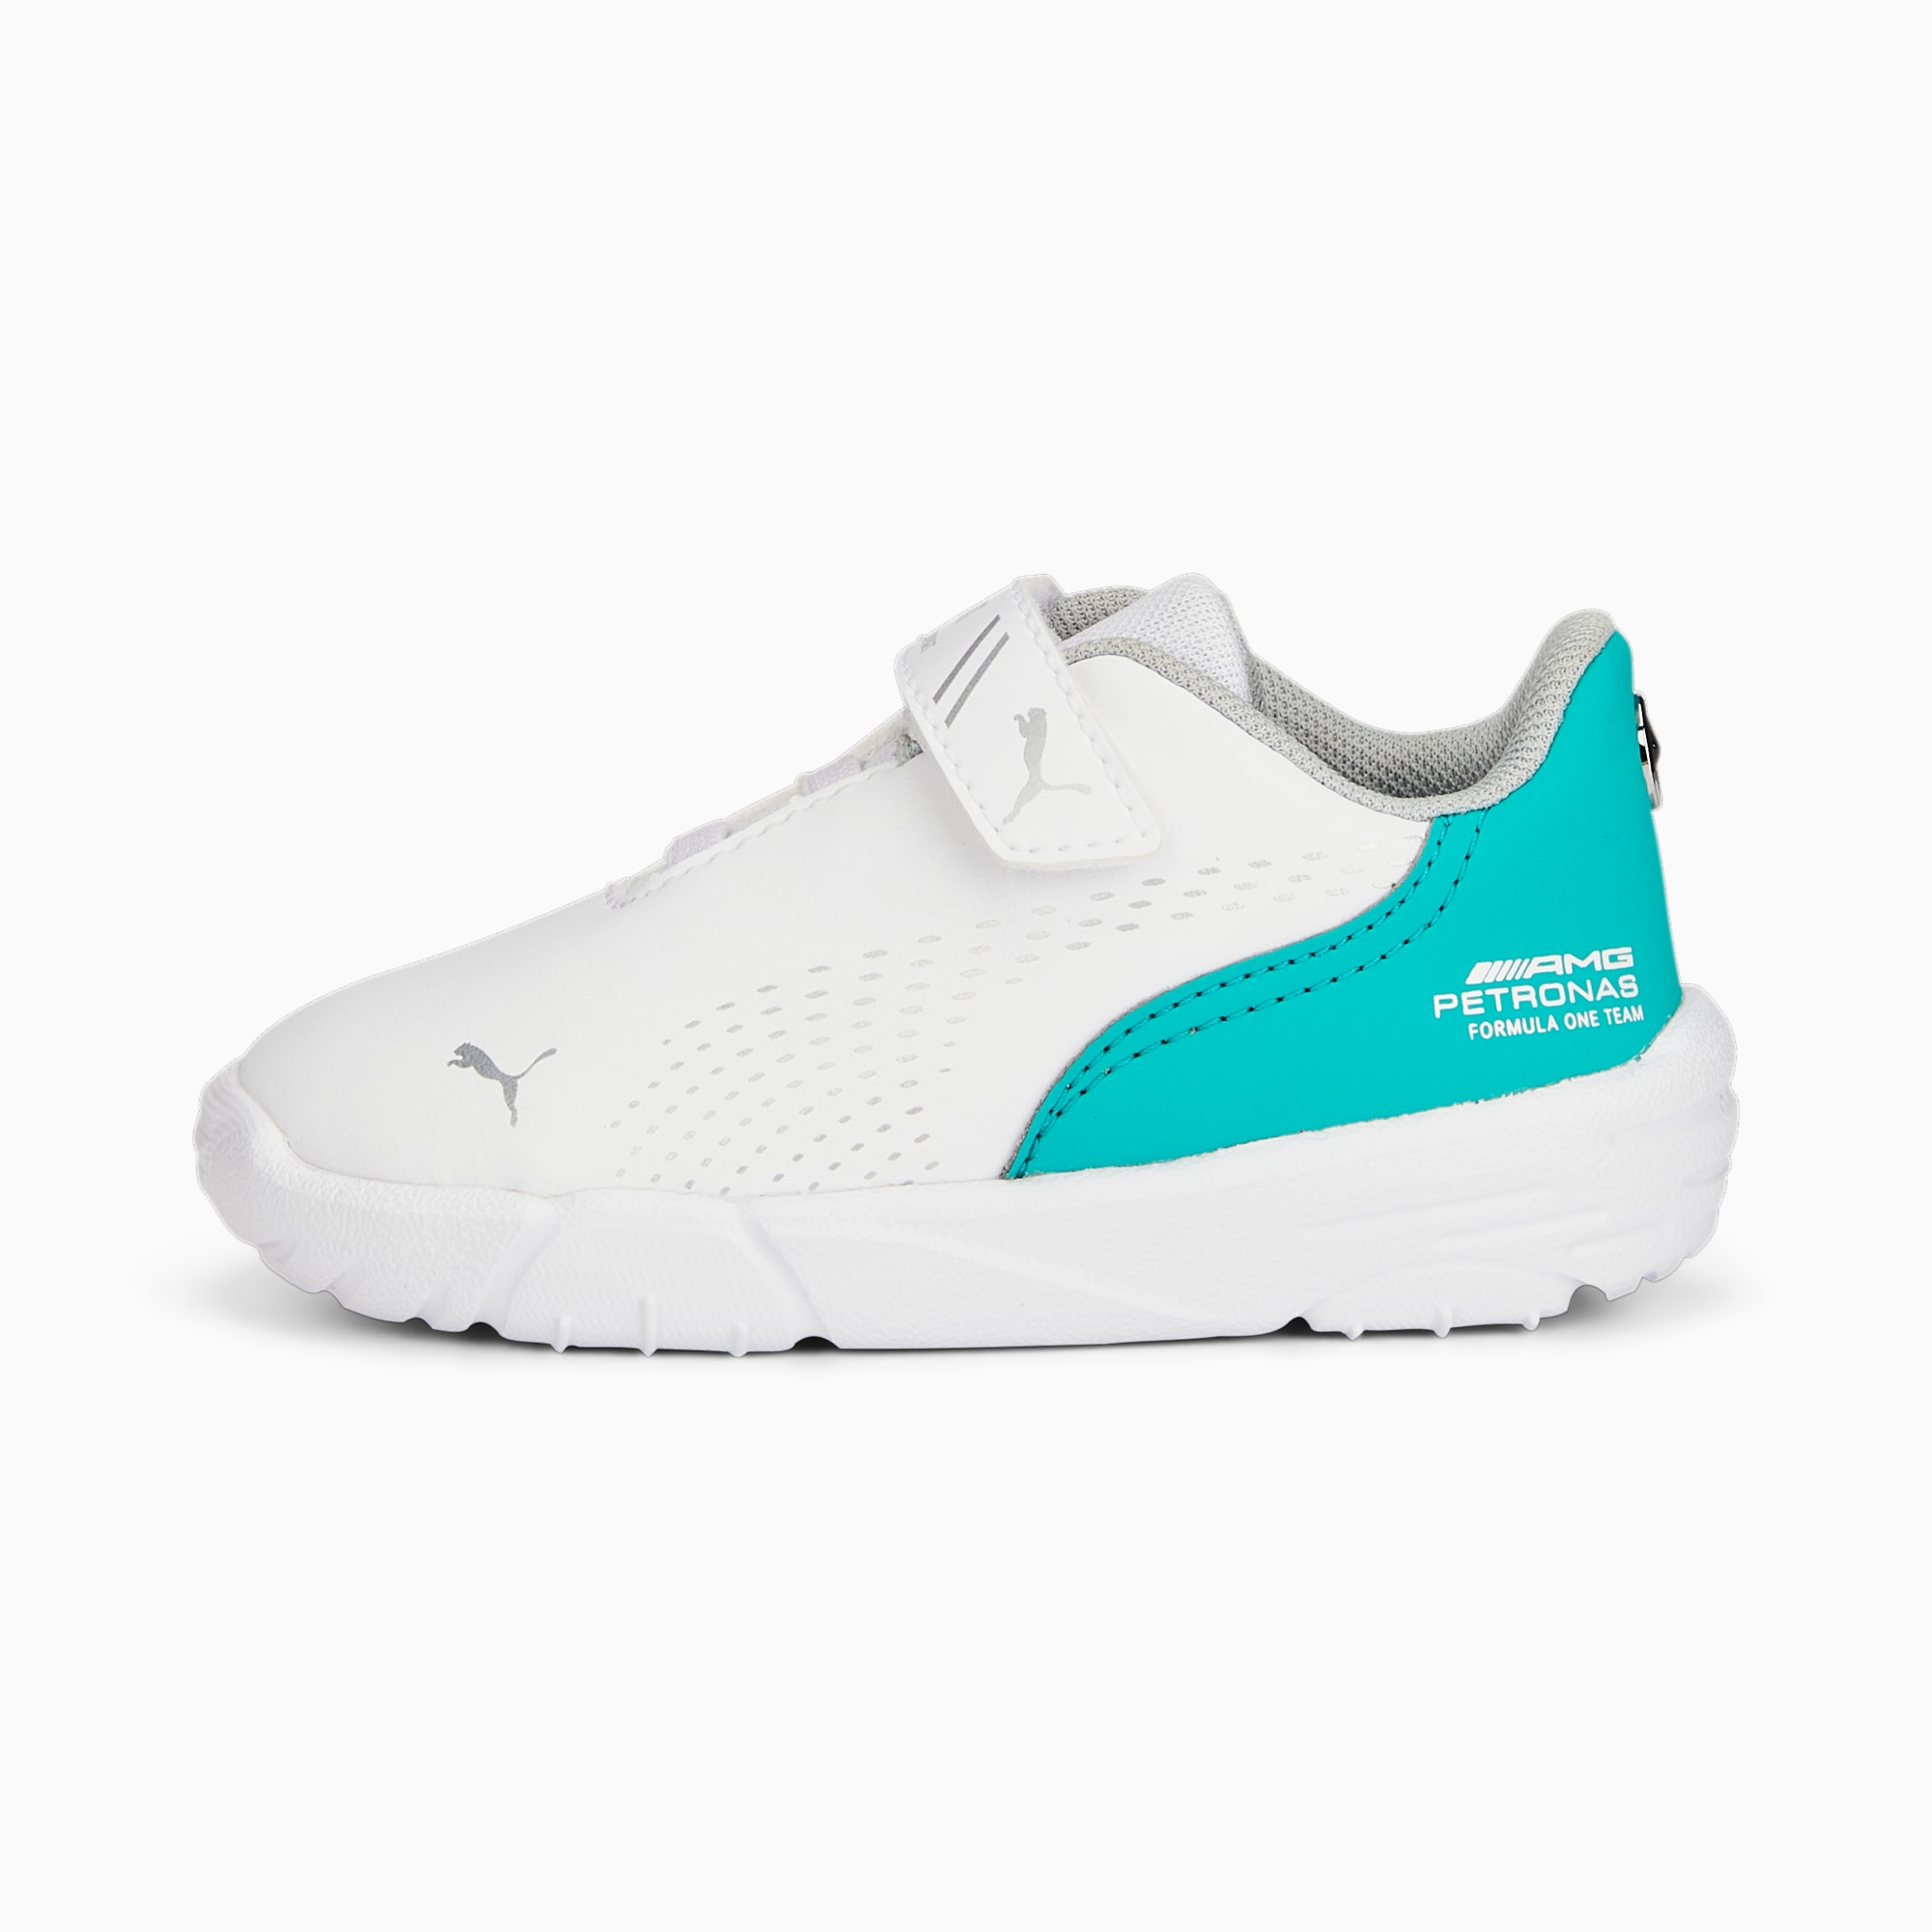 PUMA Mercedes-Amg Petronas Drift Cat Decima Toddlers' Motorsport Shoes, White/Spectra Green/Silver, Size 19, Shoes